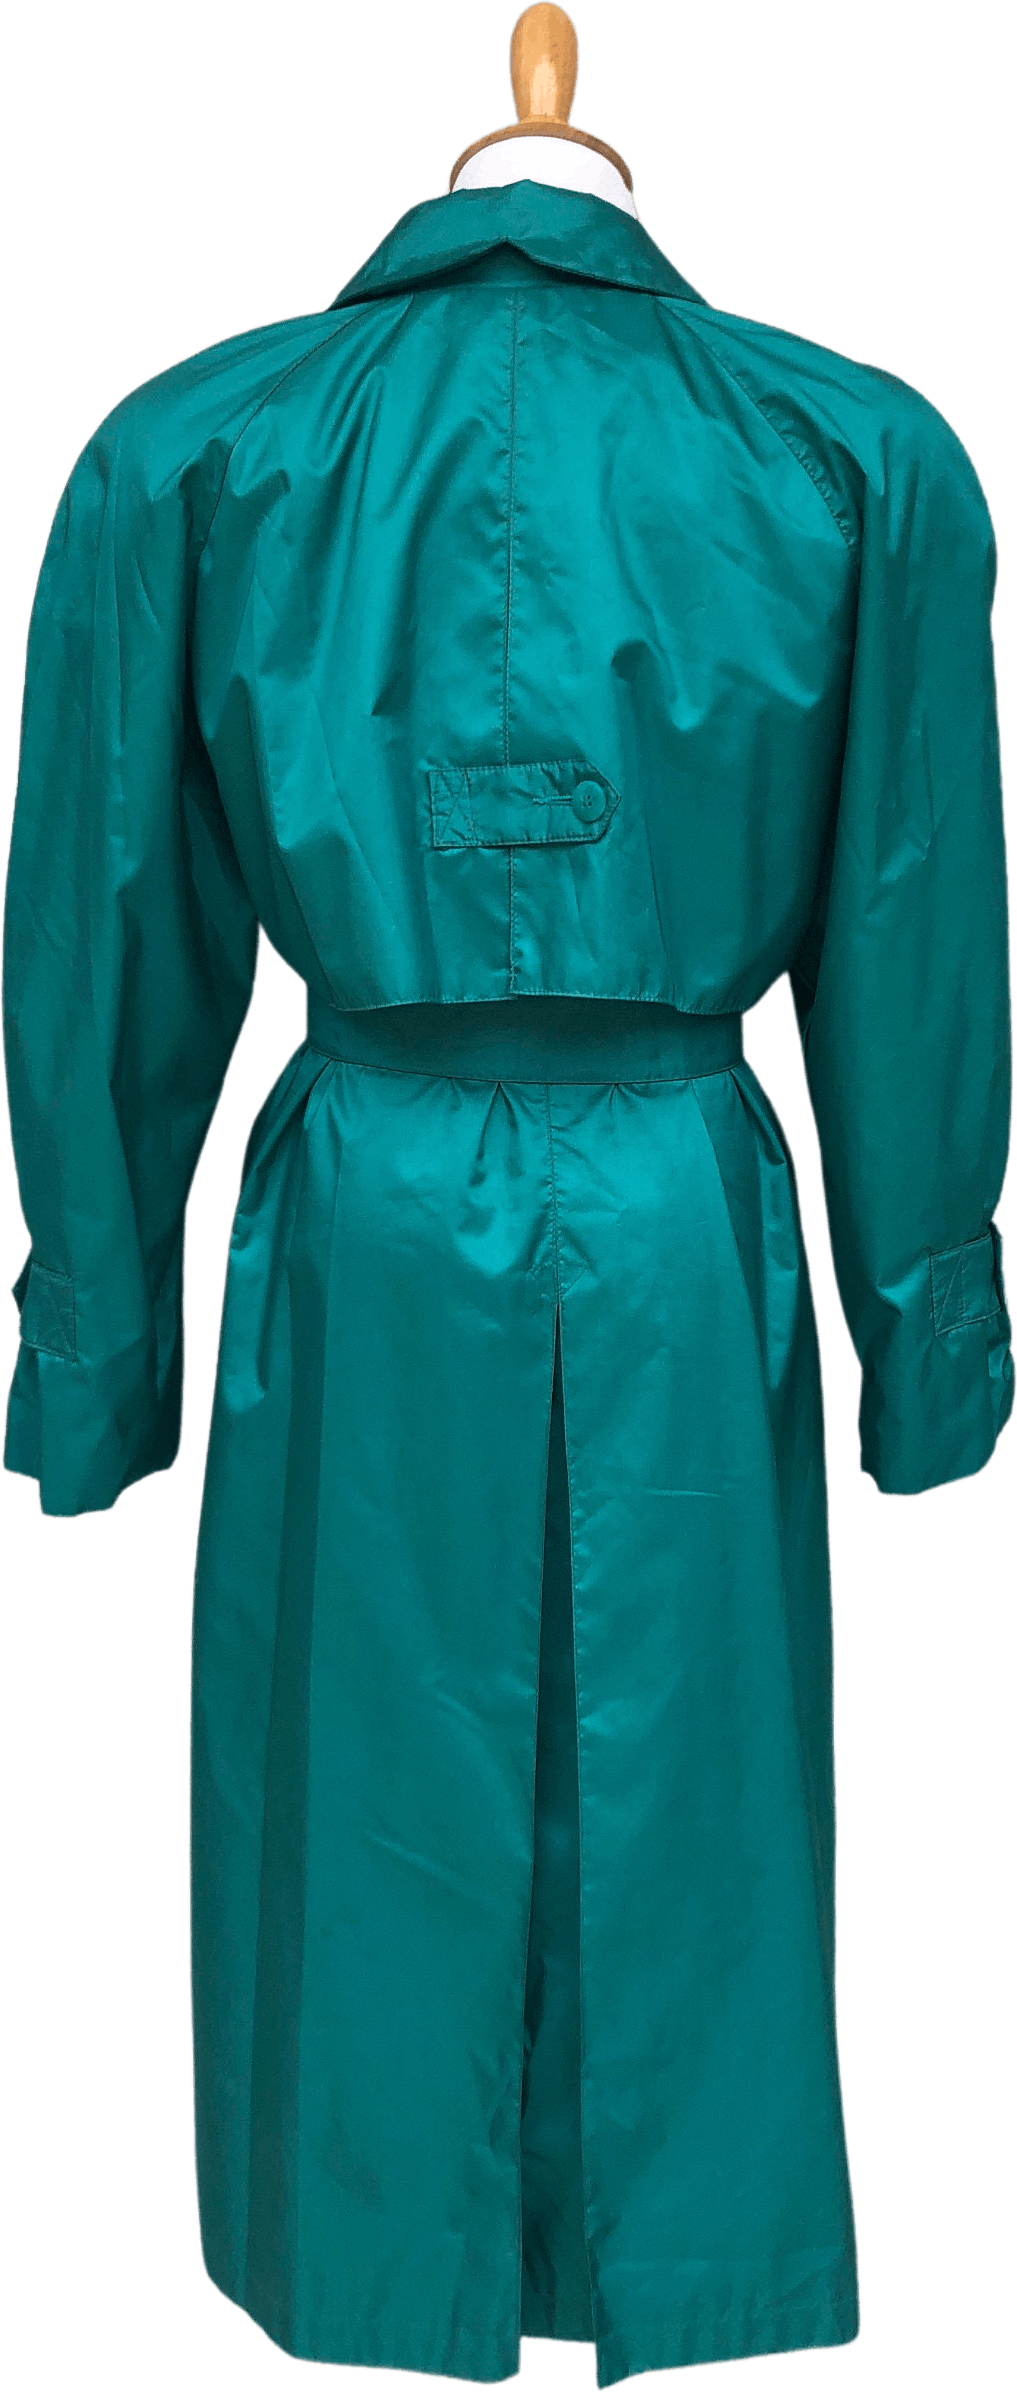 Vintage Turquoise Padded Shoulders Trench Coat by British Mist | Shop ...